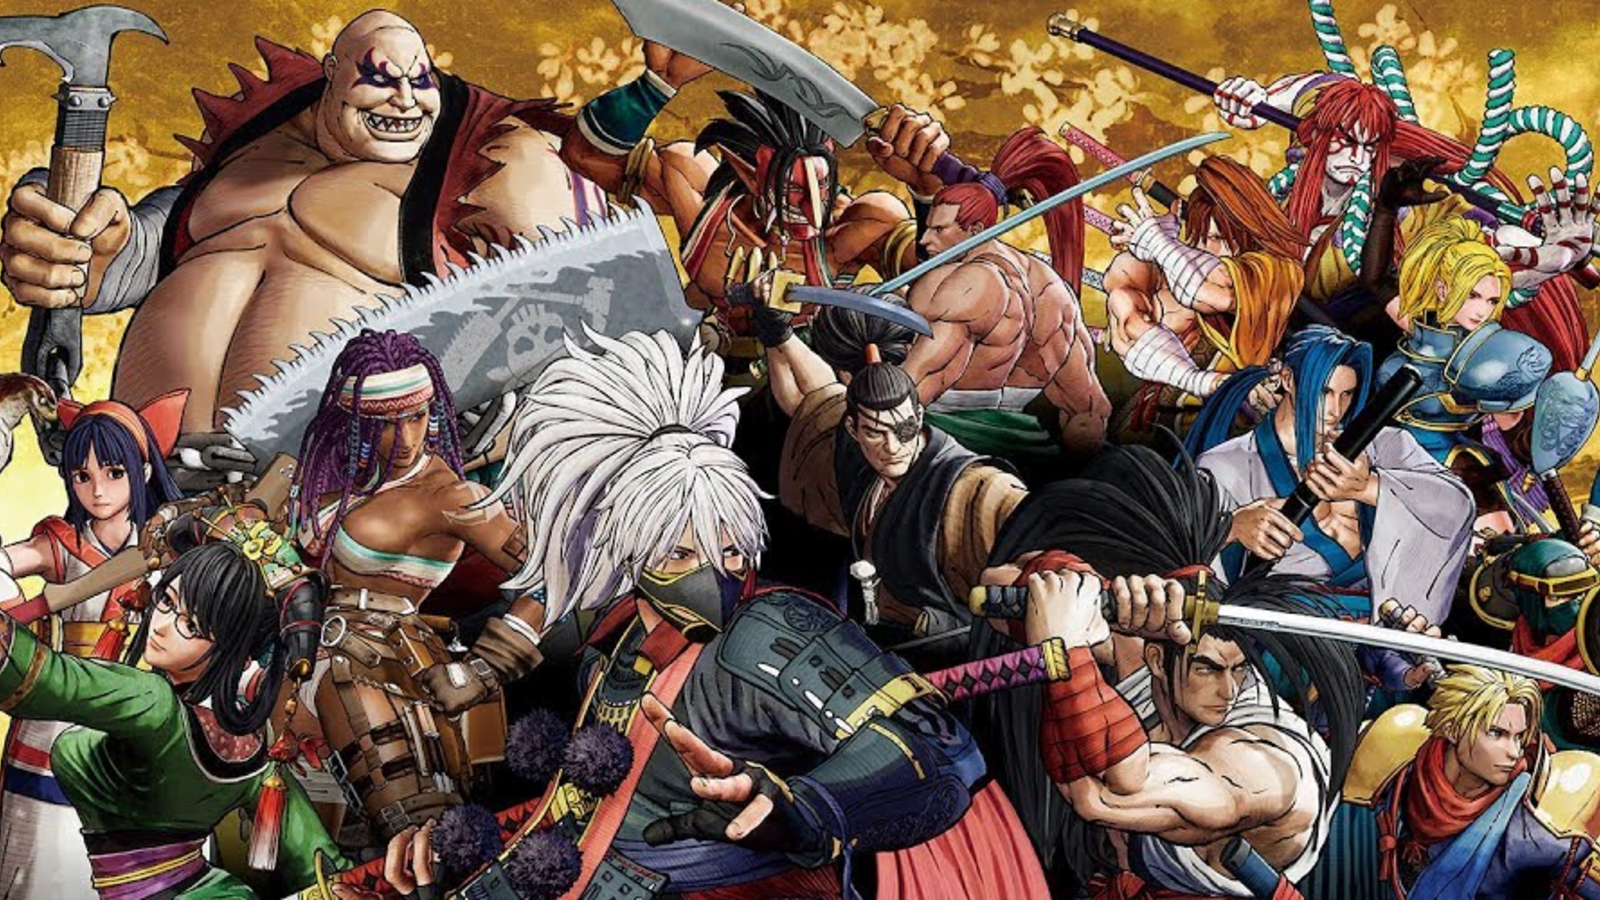 Samurai Shodown Update Version 1.02 New Patch Notes PC PS4 Xbox One Full Details Here 2019